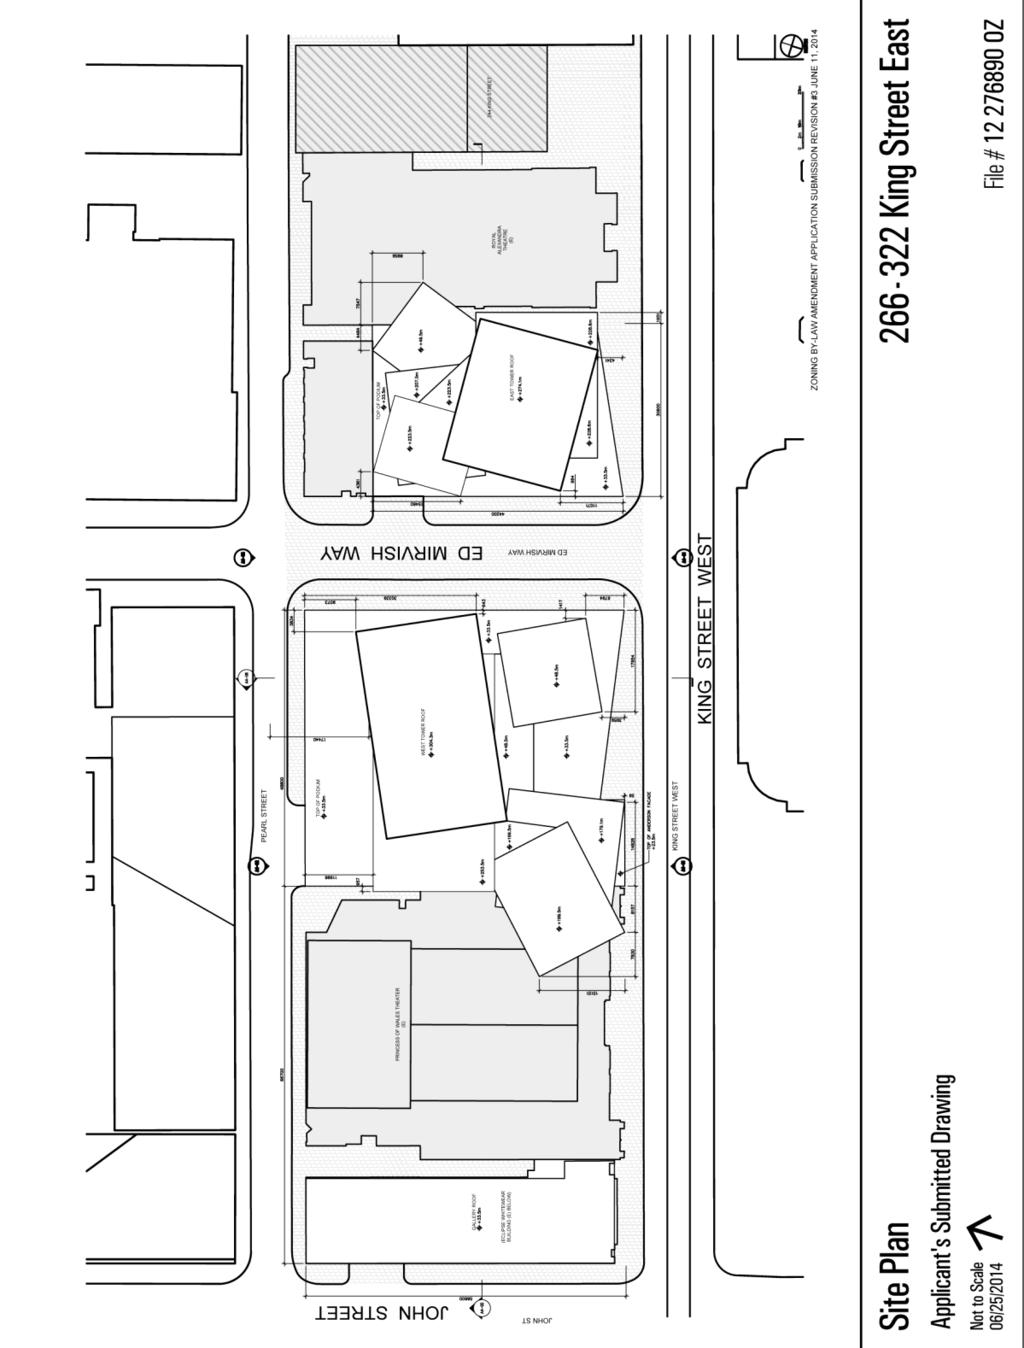 Attachment 1: Site Plan Staff report for action 266-270